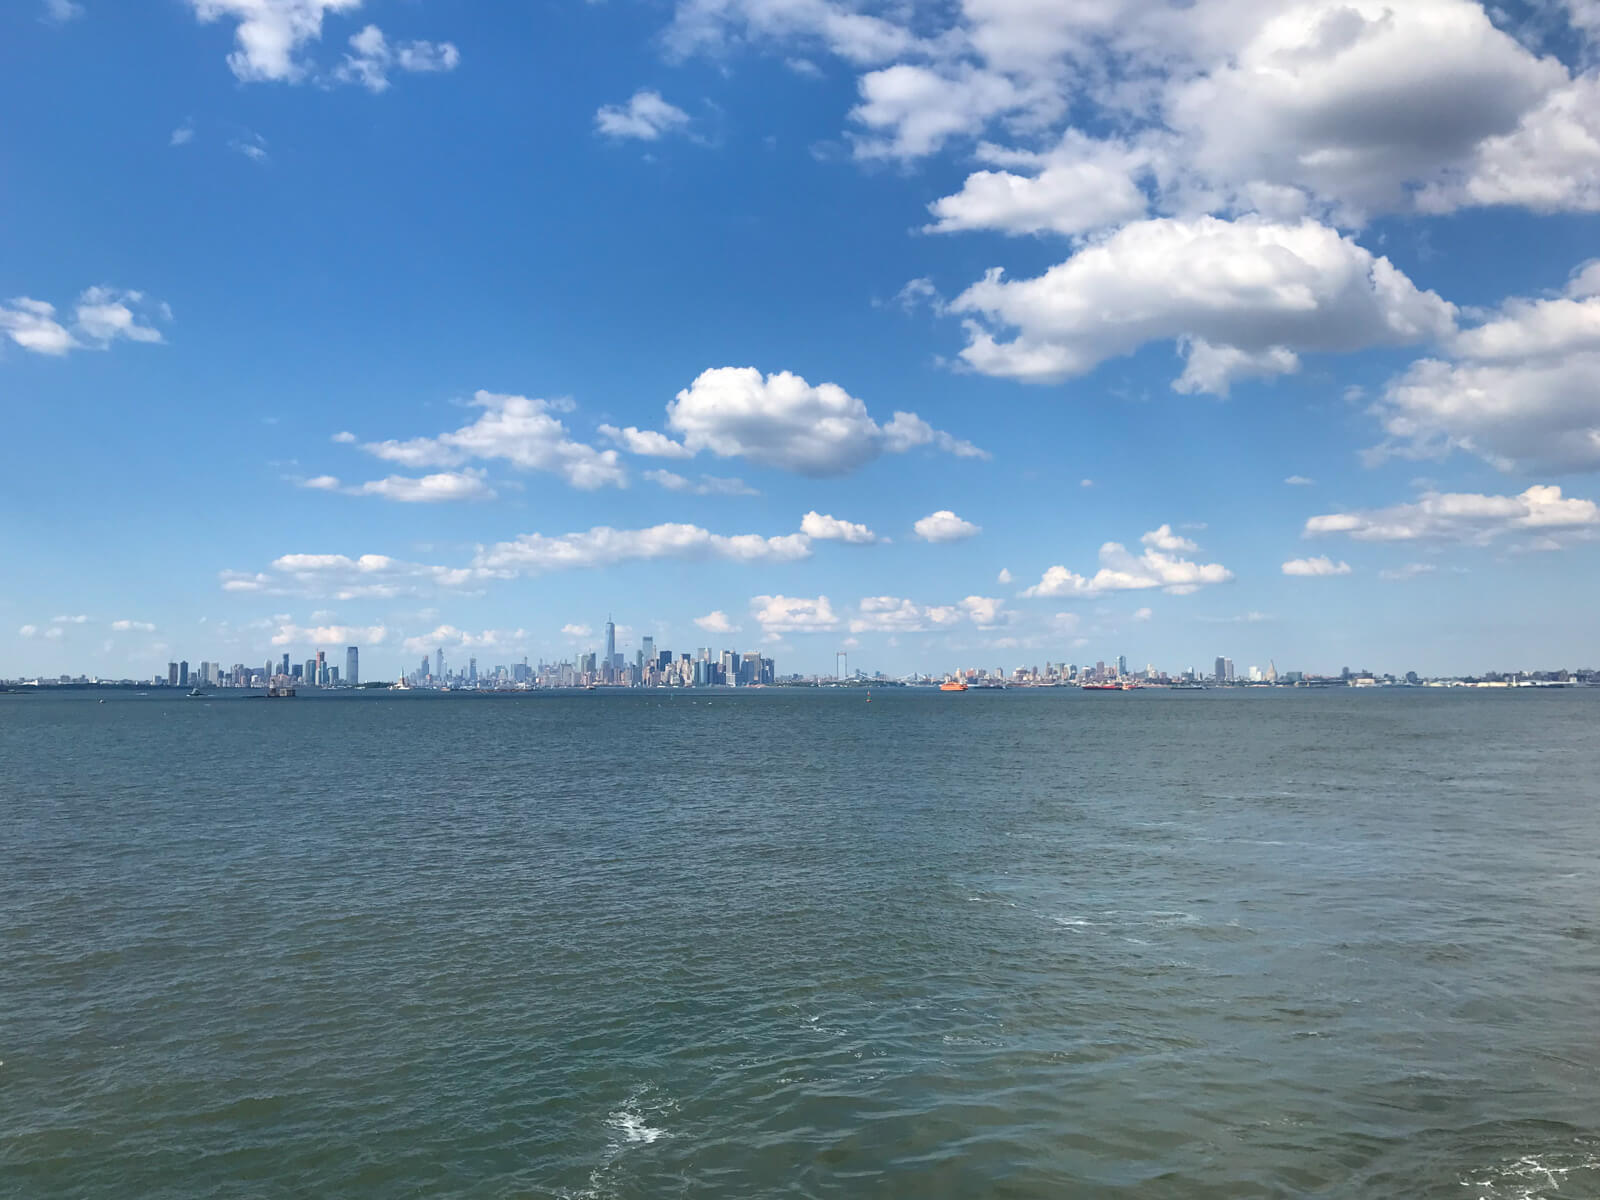 A city skyline with the ocean taking up the bottom half of the frame and blue sky with many clouds taking up the top half of the frame